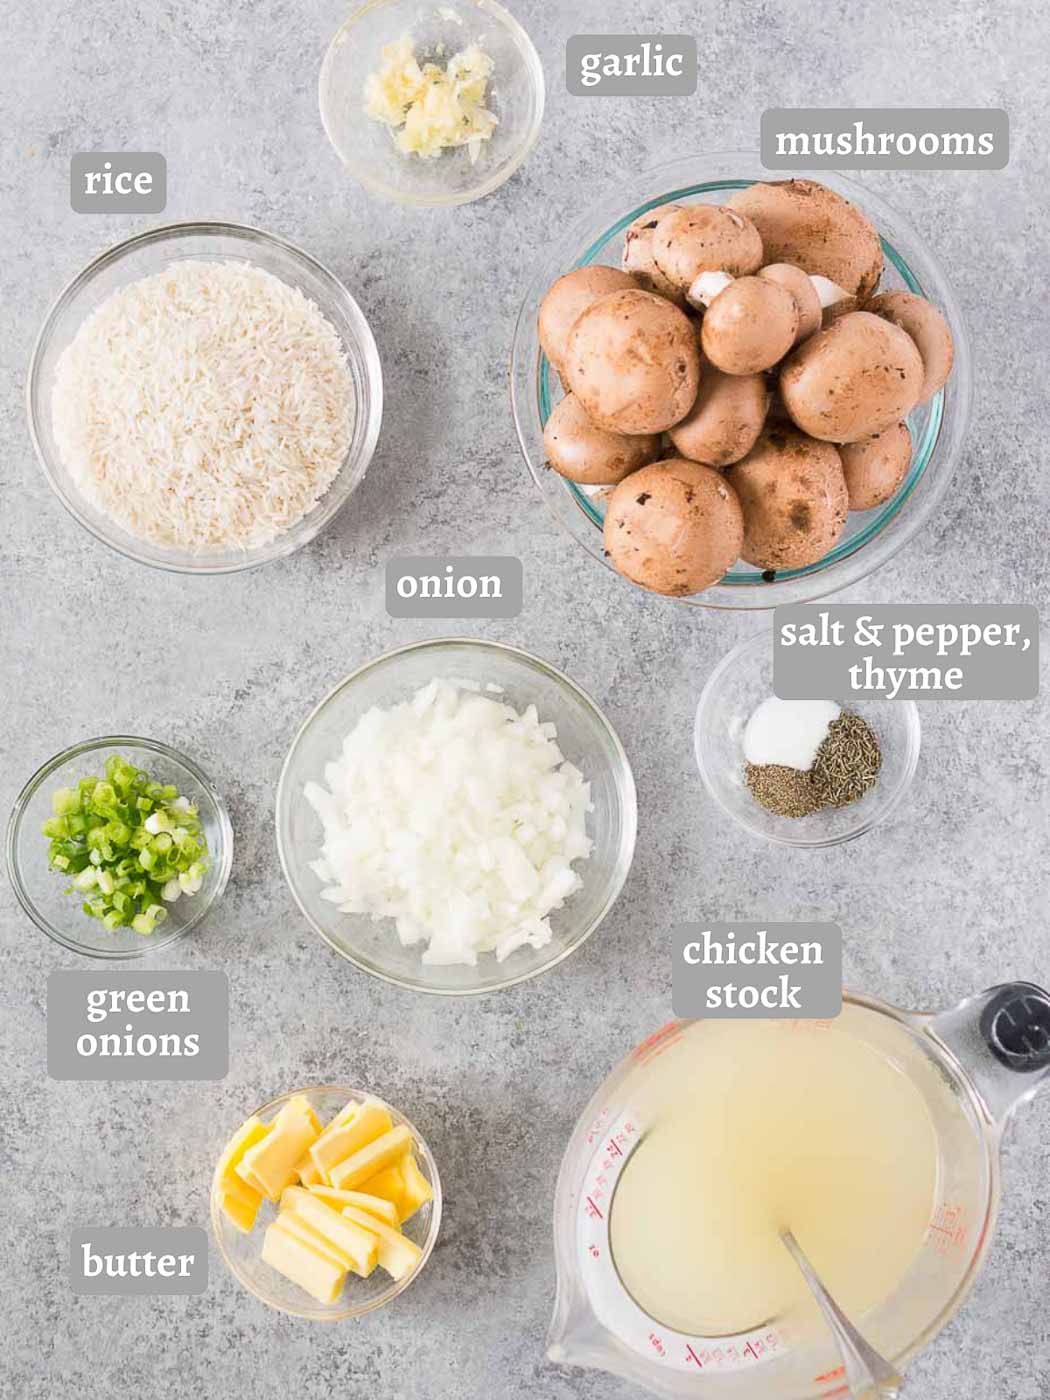 ingredients for mushrooms and rice